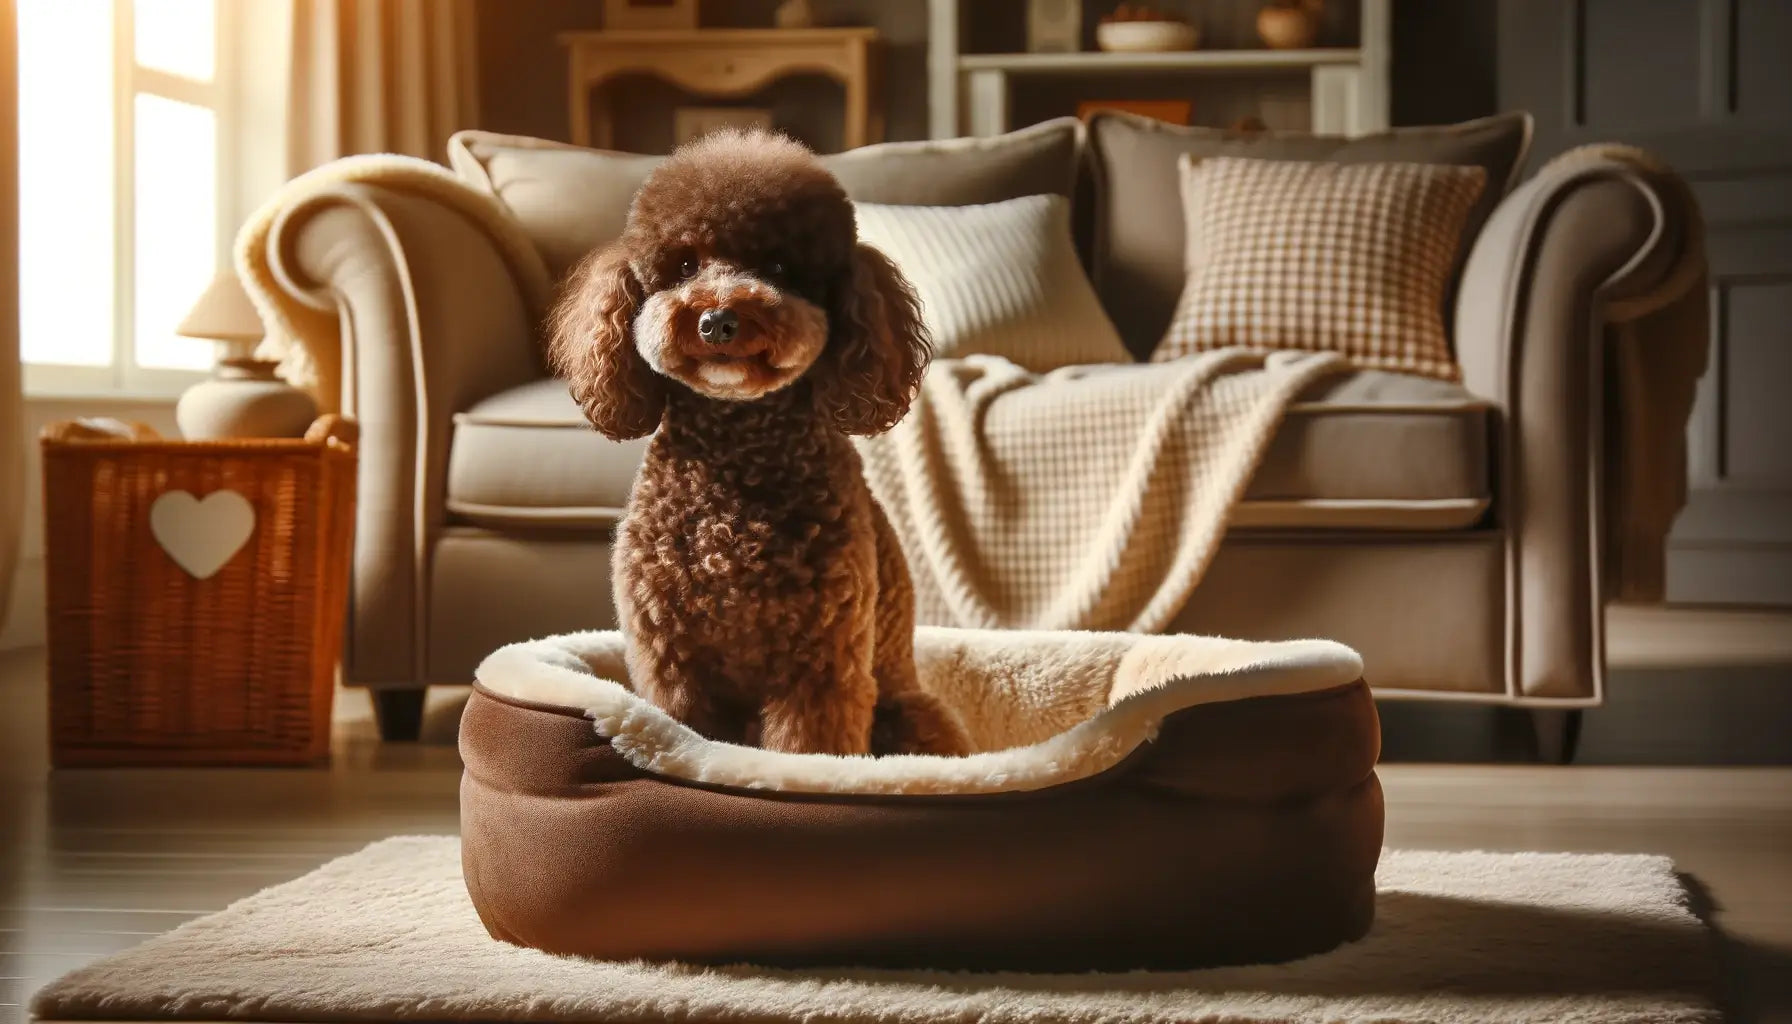 A brown Poodle sitting in a cozy pet bed, looking content and comfortable.